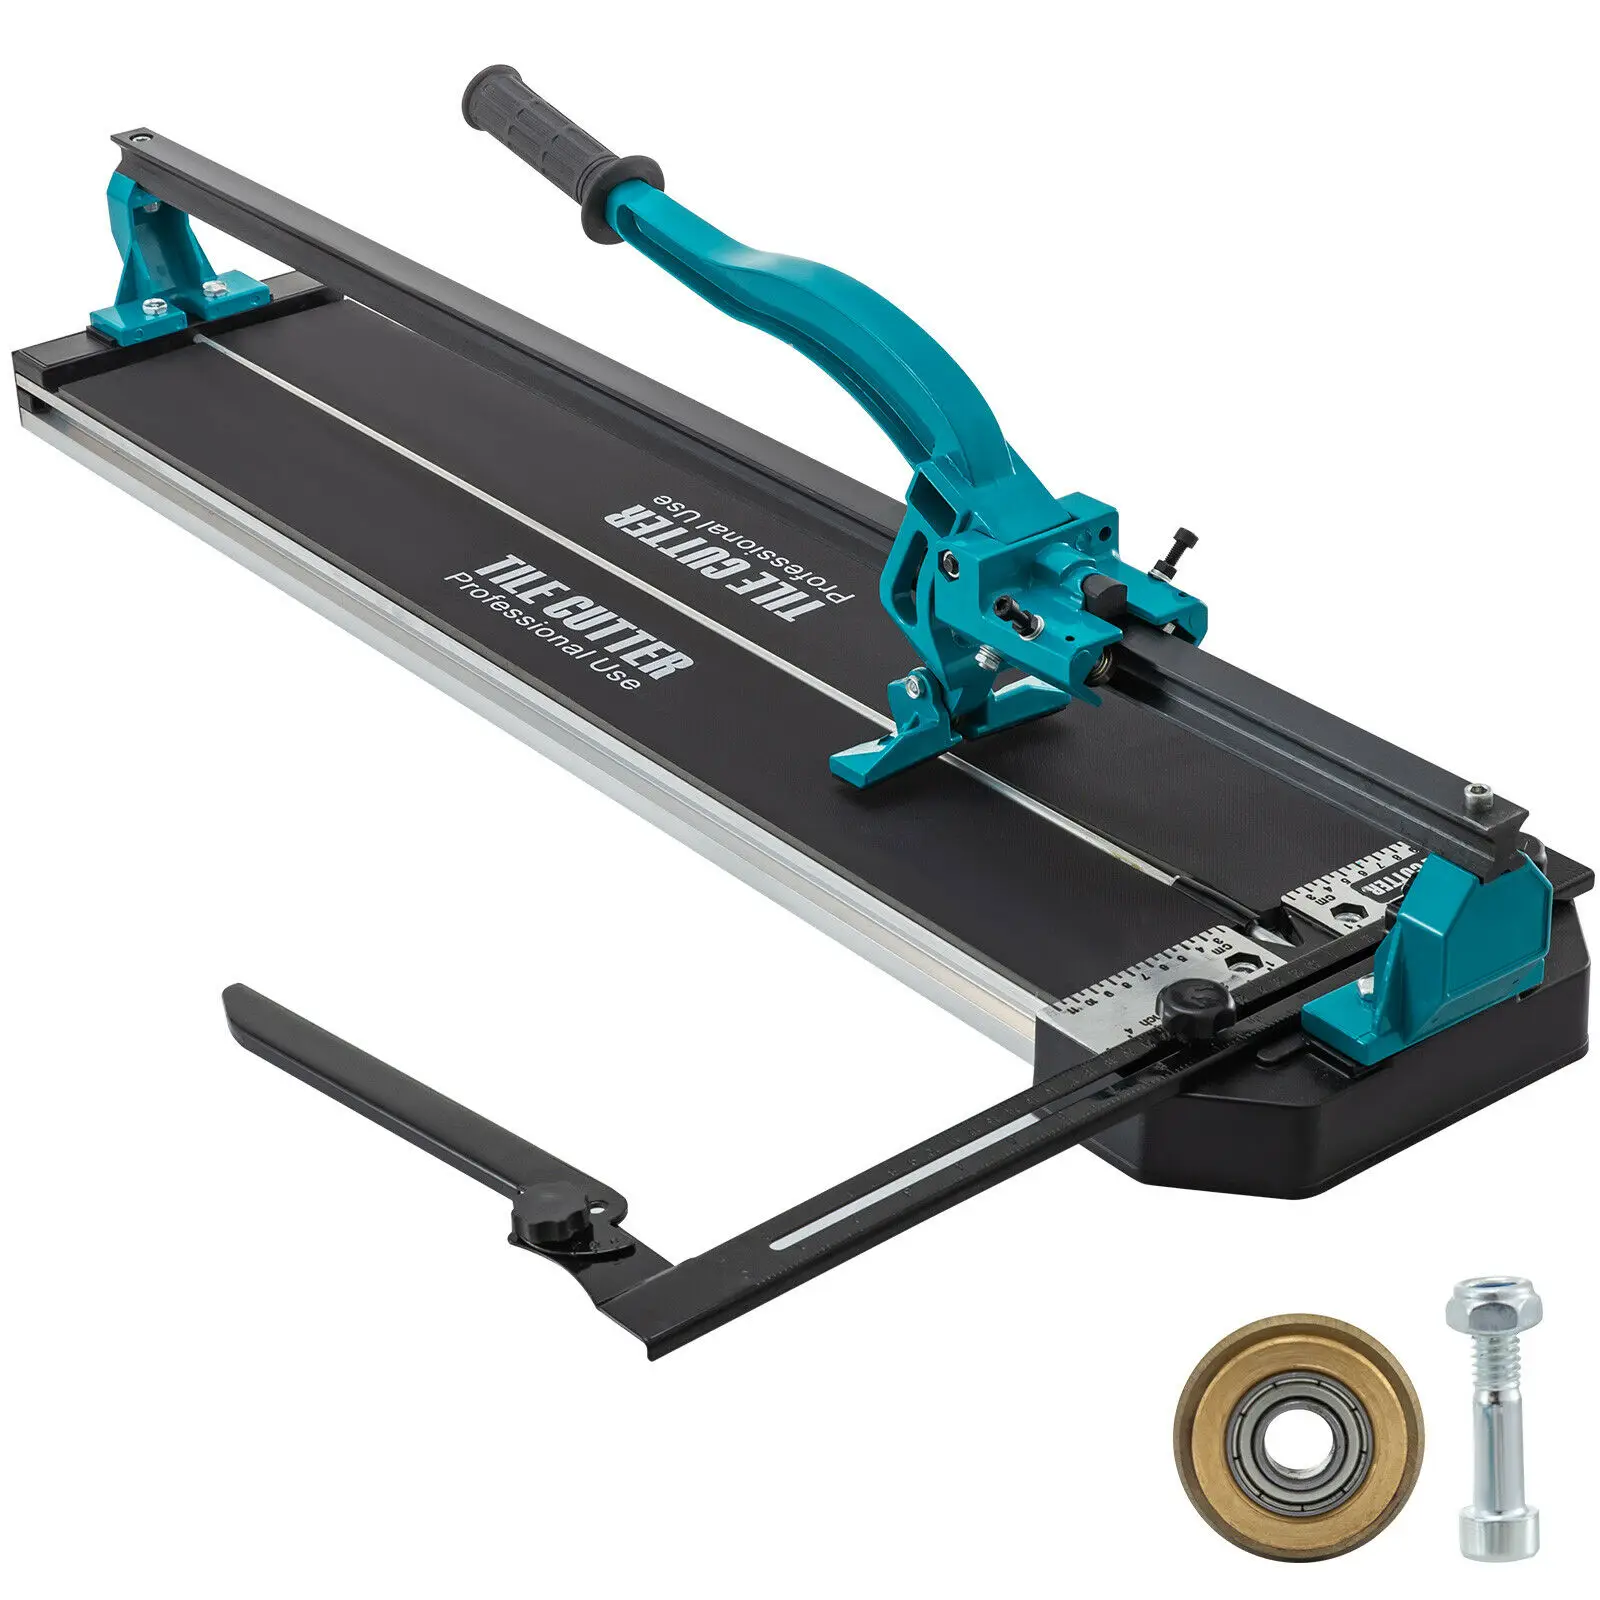 800mm tile cutter single rail Manual tile cutter 3/5 in cap with precise laser positioning Manual tile cutter tool